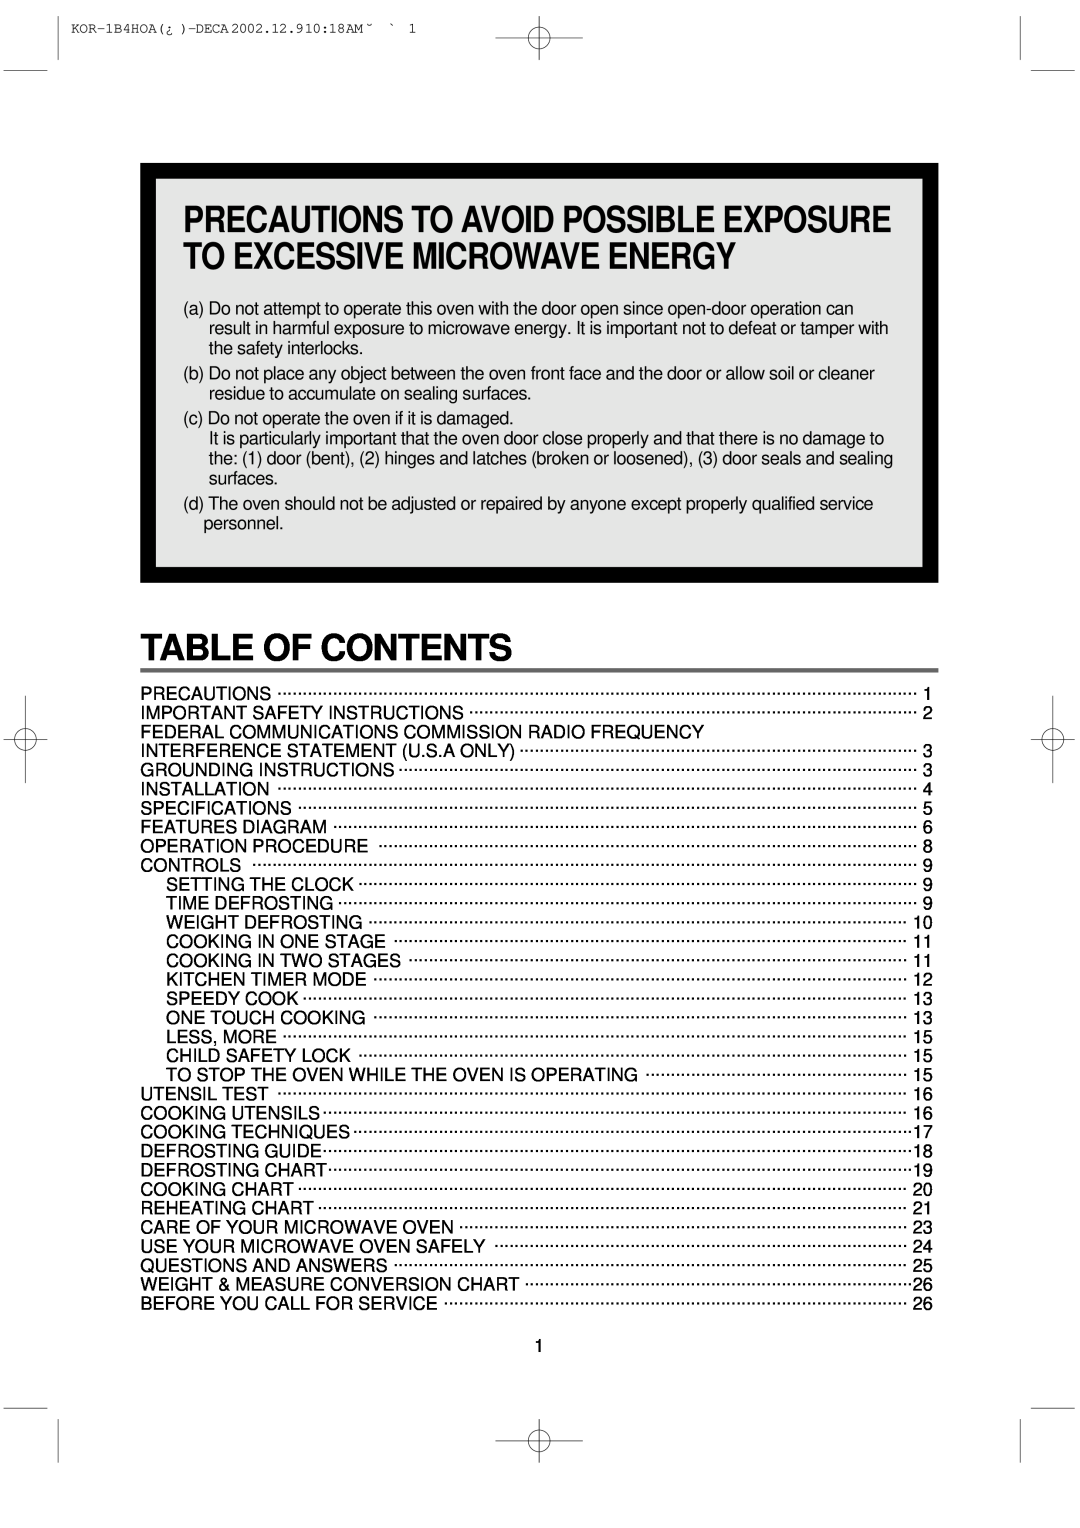 Daewoo KOR-1B4H manual Table Of Contents, Precautions To Avoid Possible Exposure To Excessive Microwave Energy 